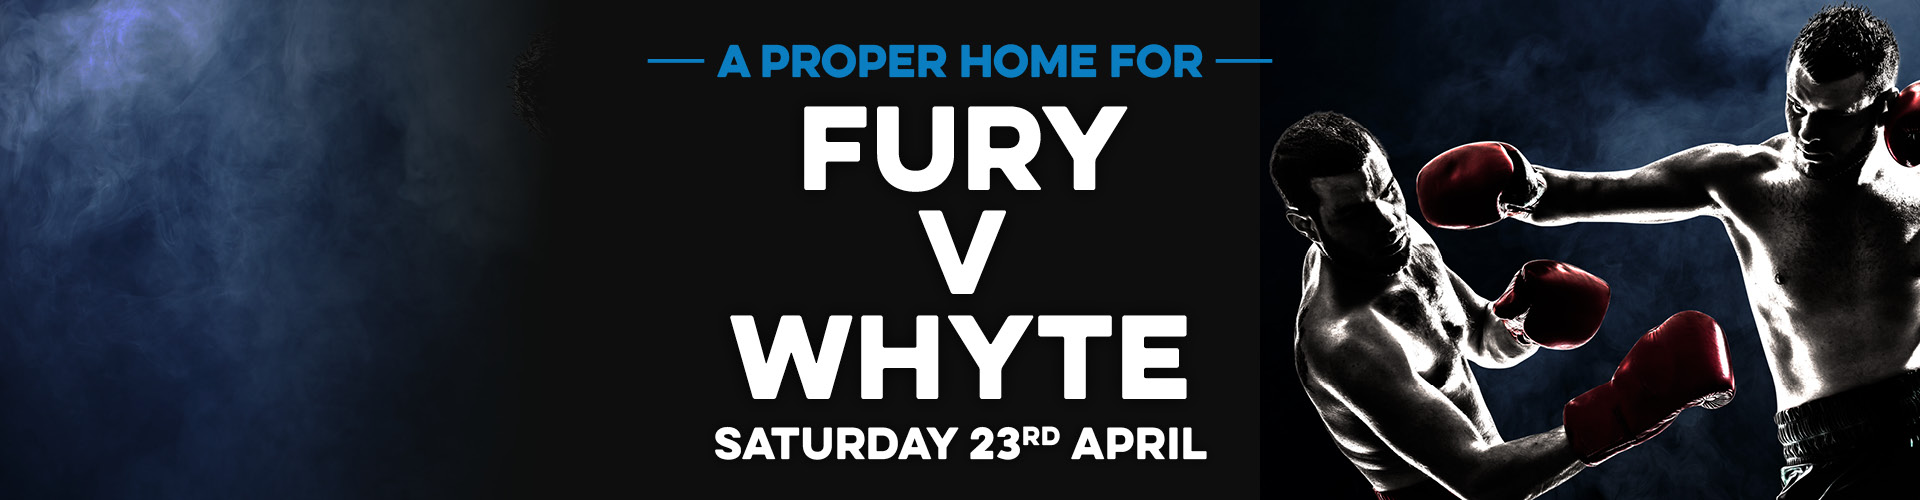 Watch Fury vs Whyte live in Thame